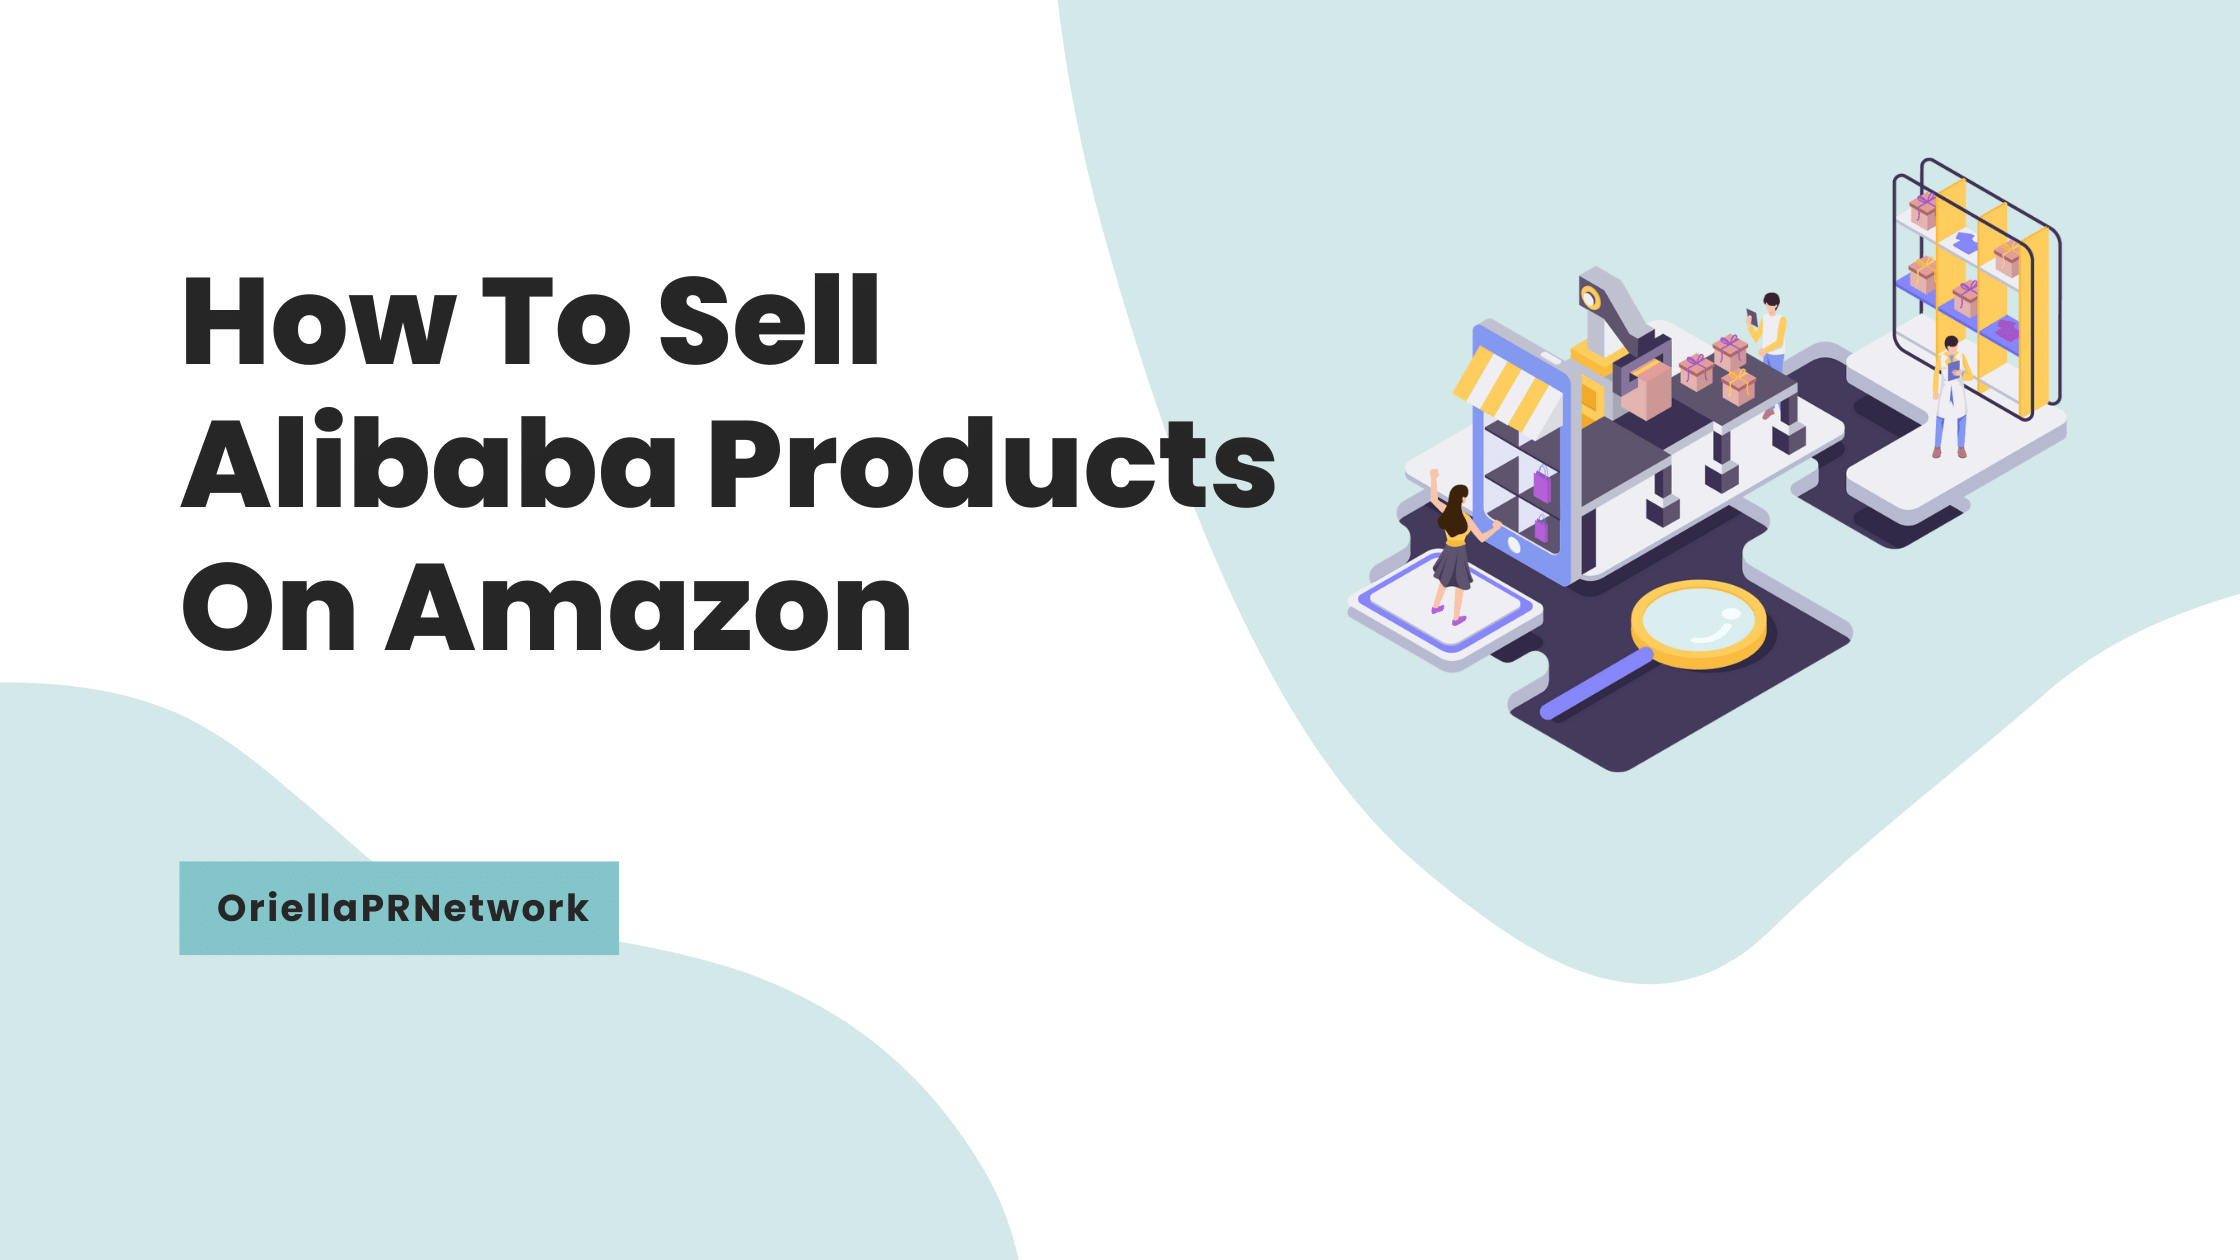 How To Sell Alibaba Products On Amazon - OriellaPRNetwork